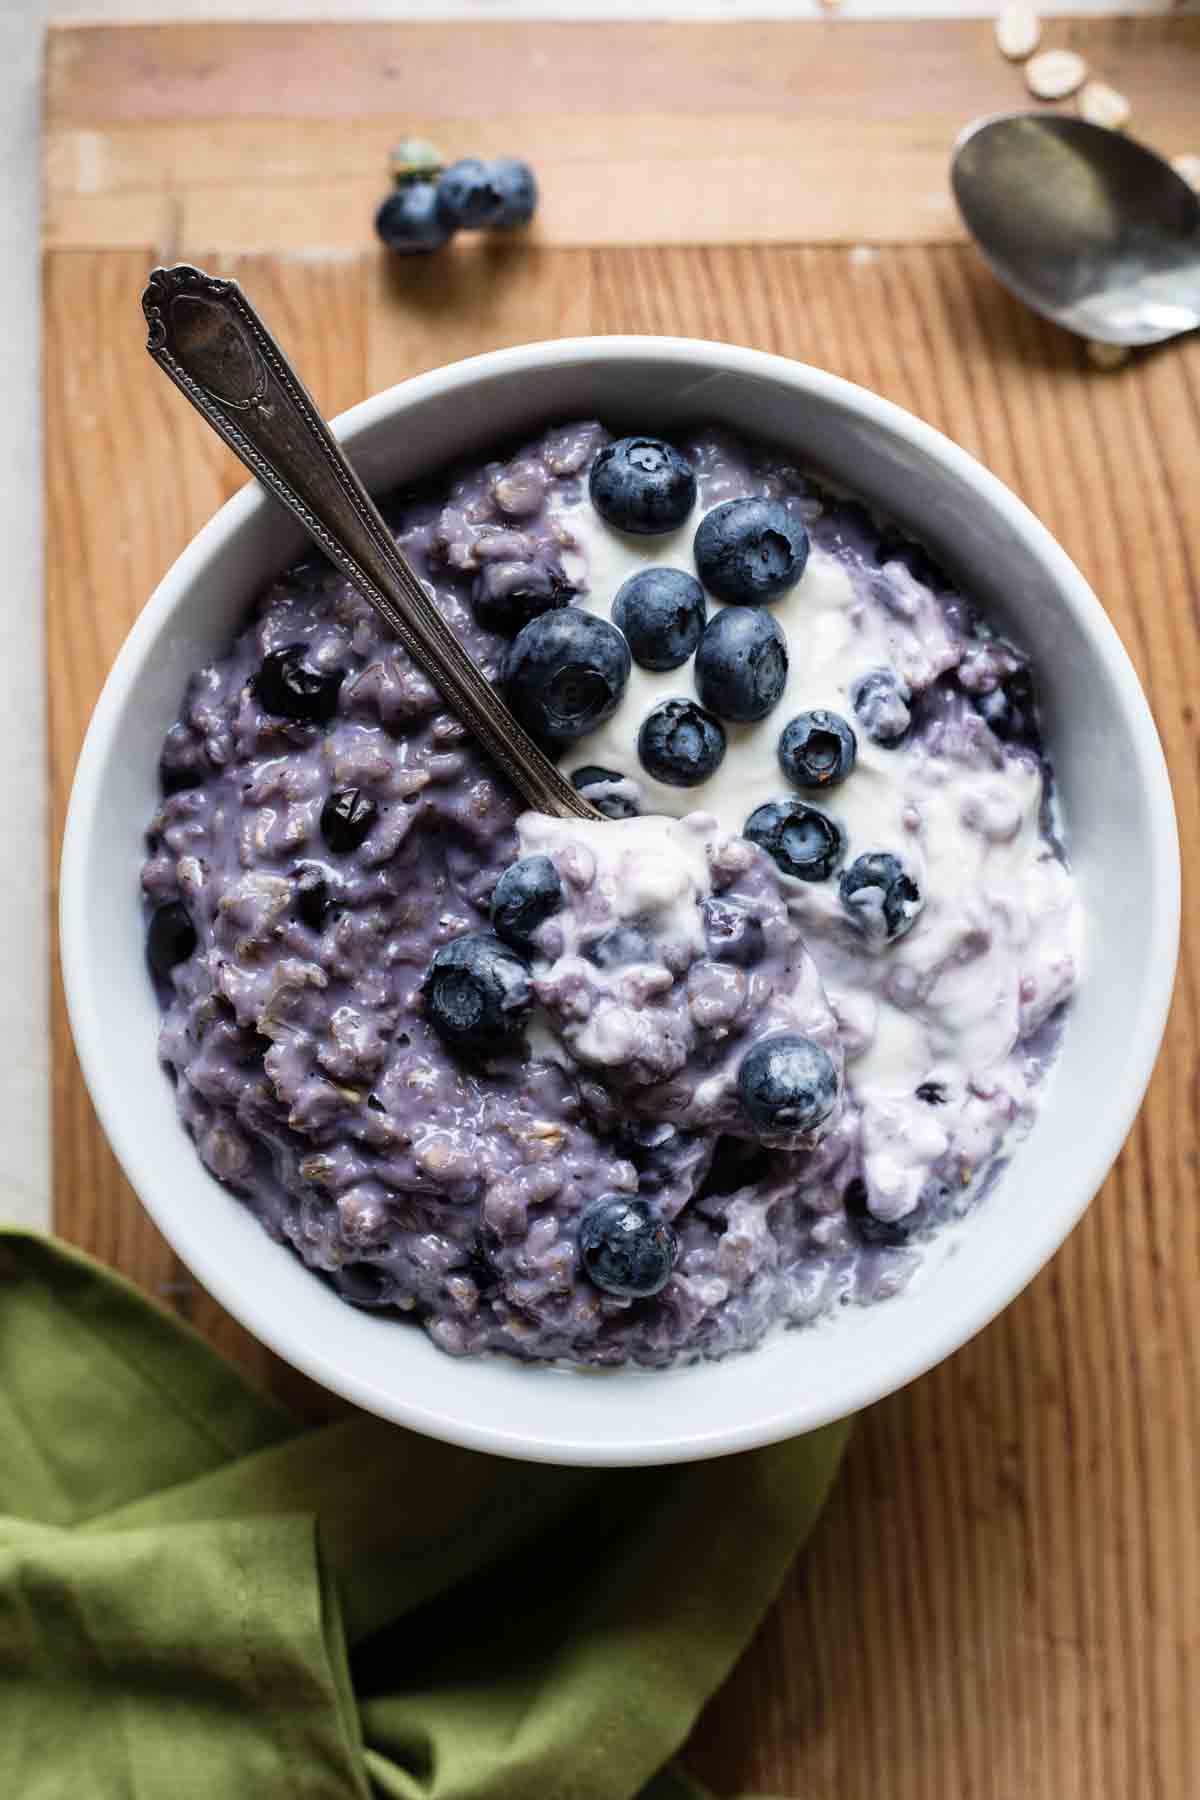 Bowl filled with purple colored blueberry oatmeal, topped with cream and fresh blueberries.